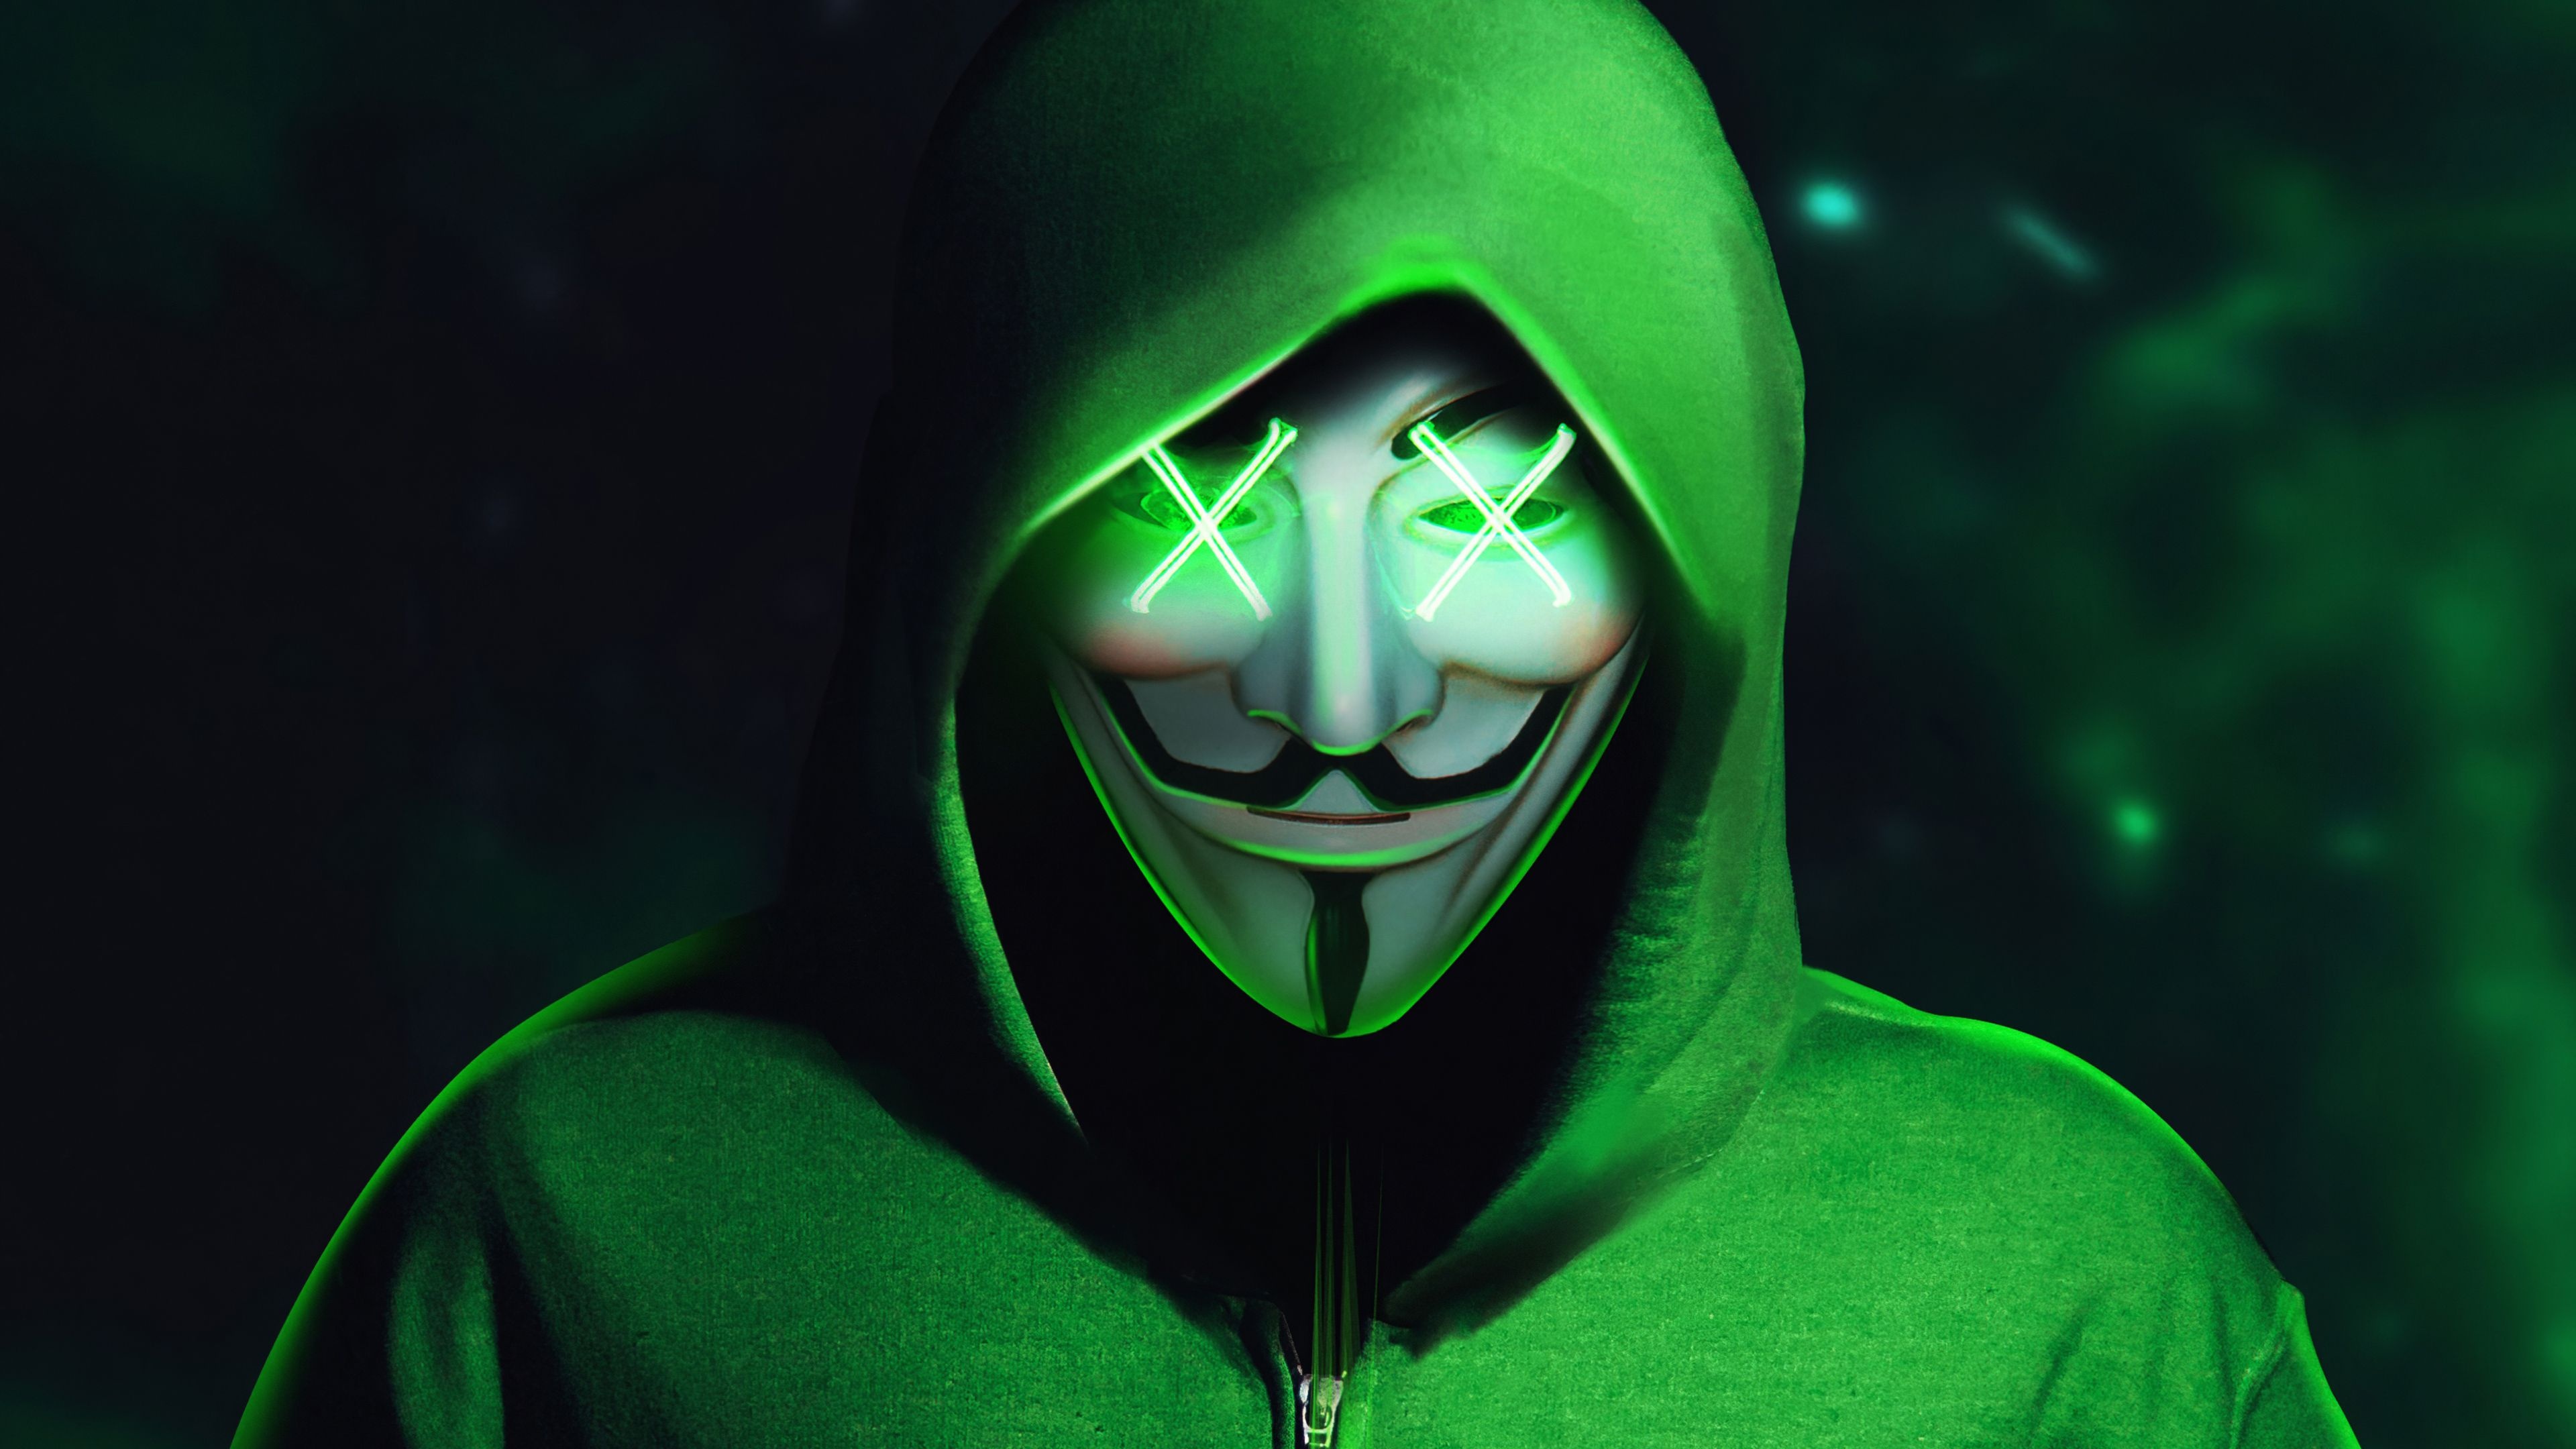 Guy Fawkes Mask: The design came to represent broad protest, Subculture. 3840x2160 4K Background.